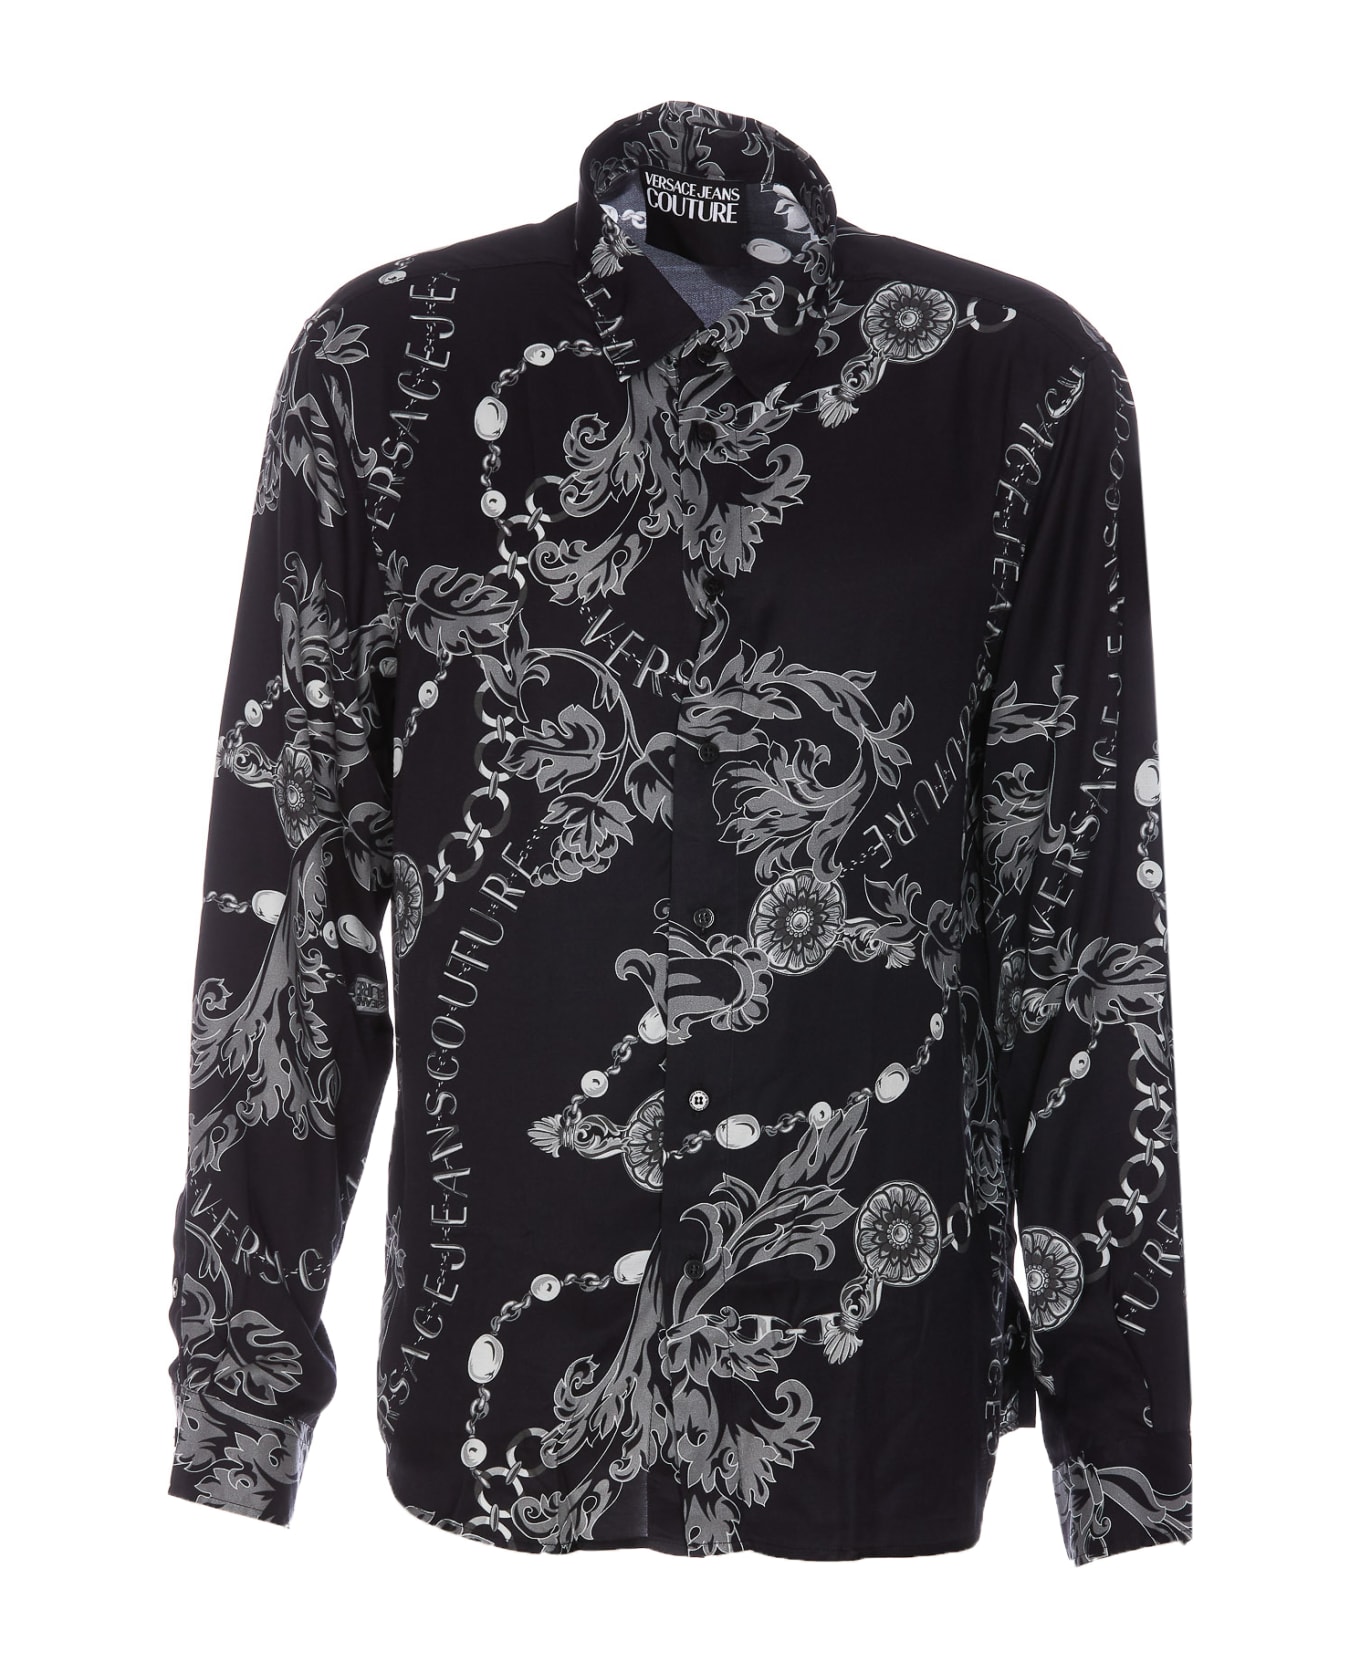 The Pink Panther Versace Gucci Fendi Chanel Shirt – Full Printed Apparel